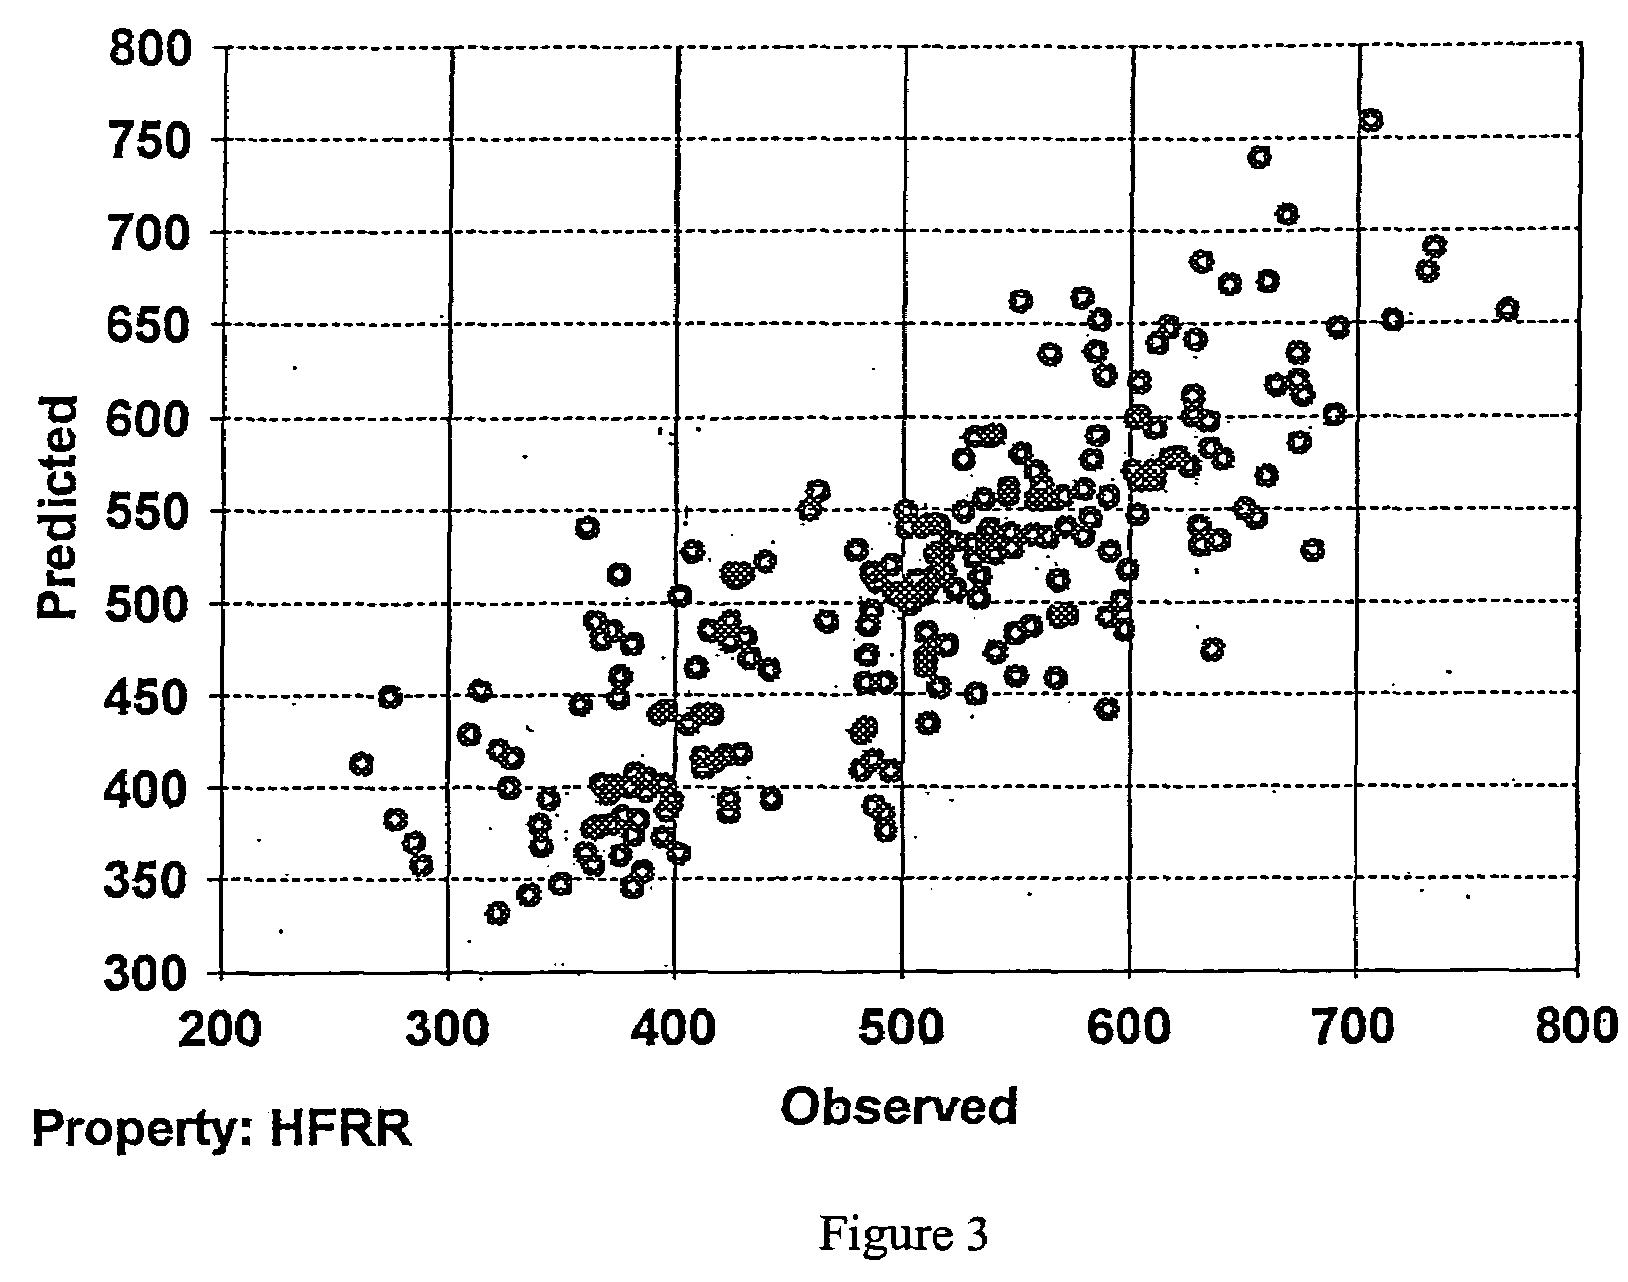 Method for prediction of high frequency reciprocating rig wear scar diameter for hydrocarbon mixtures based on mid-infrared spectroscopy